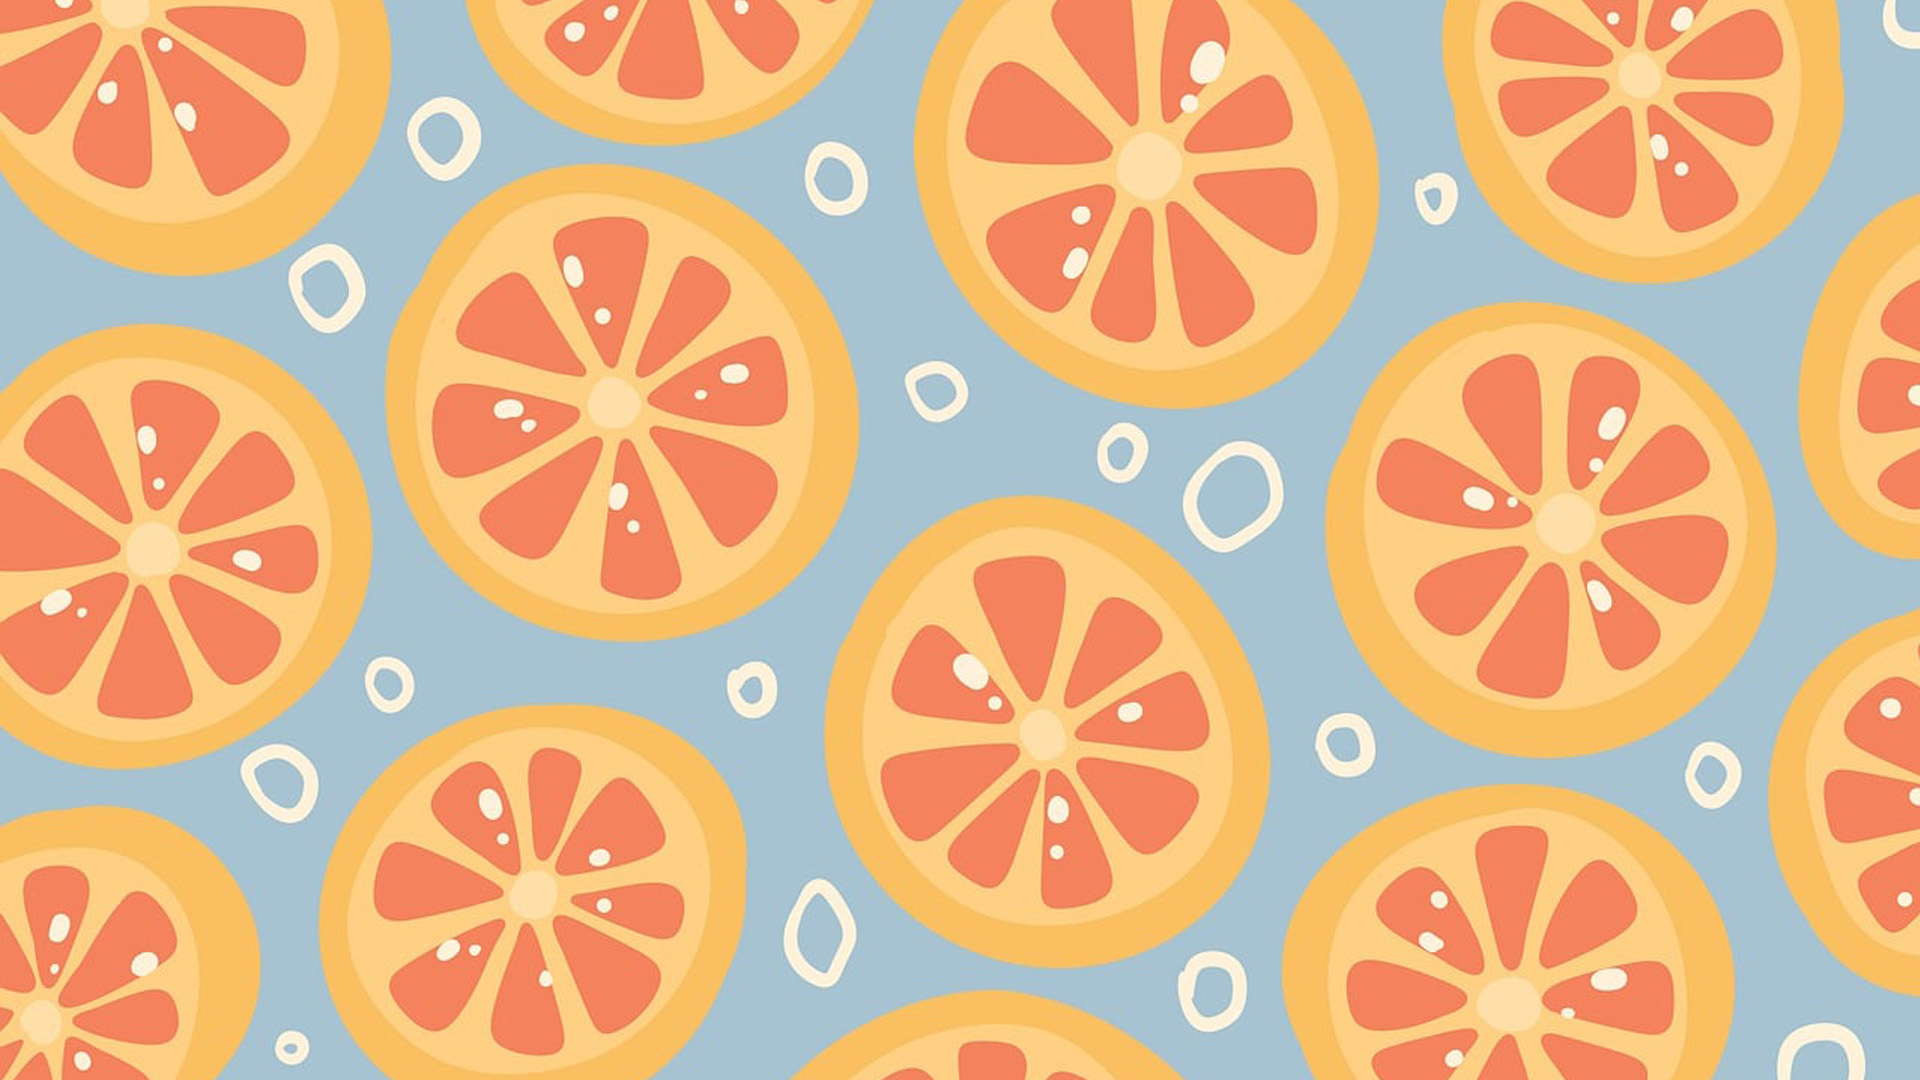 Light blue background with illustrated grapefruit sliced in half making up a pattern across the image.